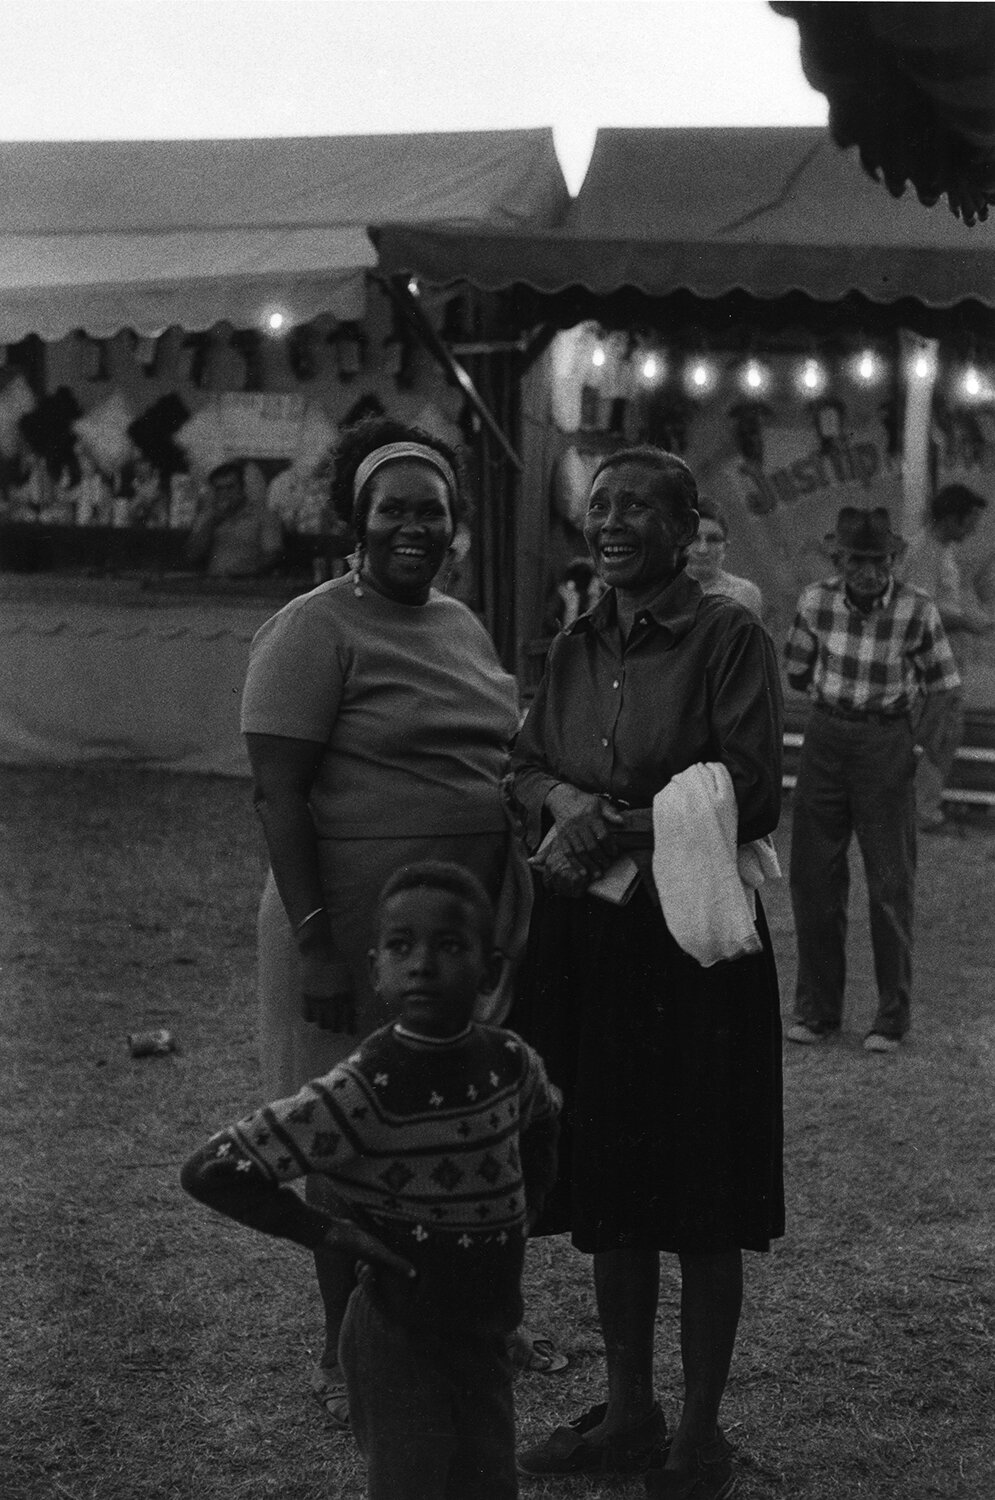   Decatur County Fair , 1974 Silver Gelatin Print 9 3/4 × 6 1/2 in. (image size) The Do Good Fund, Inc., 2017-52 